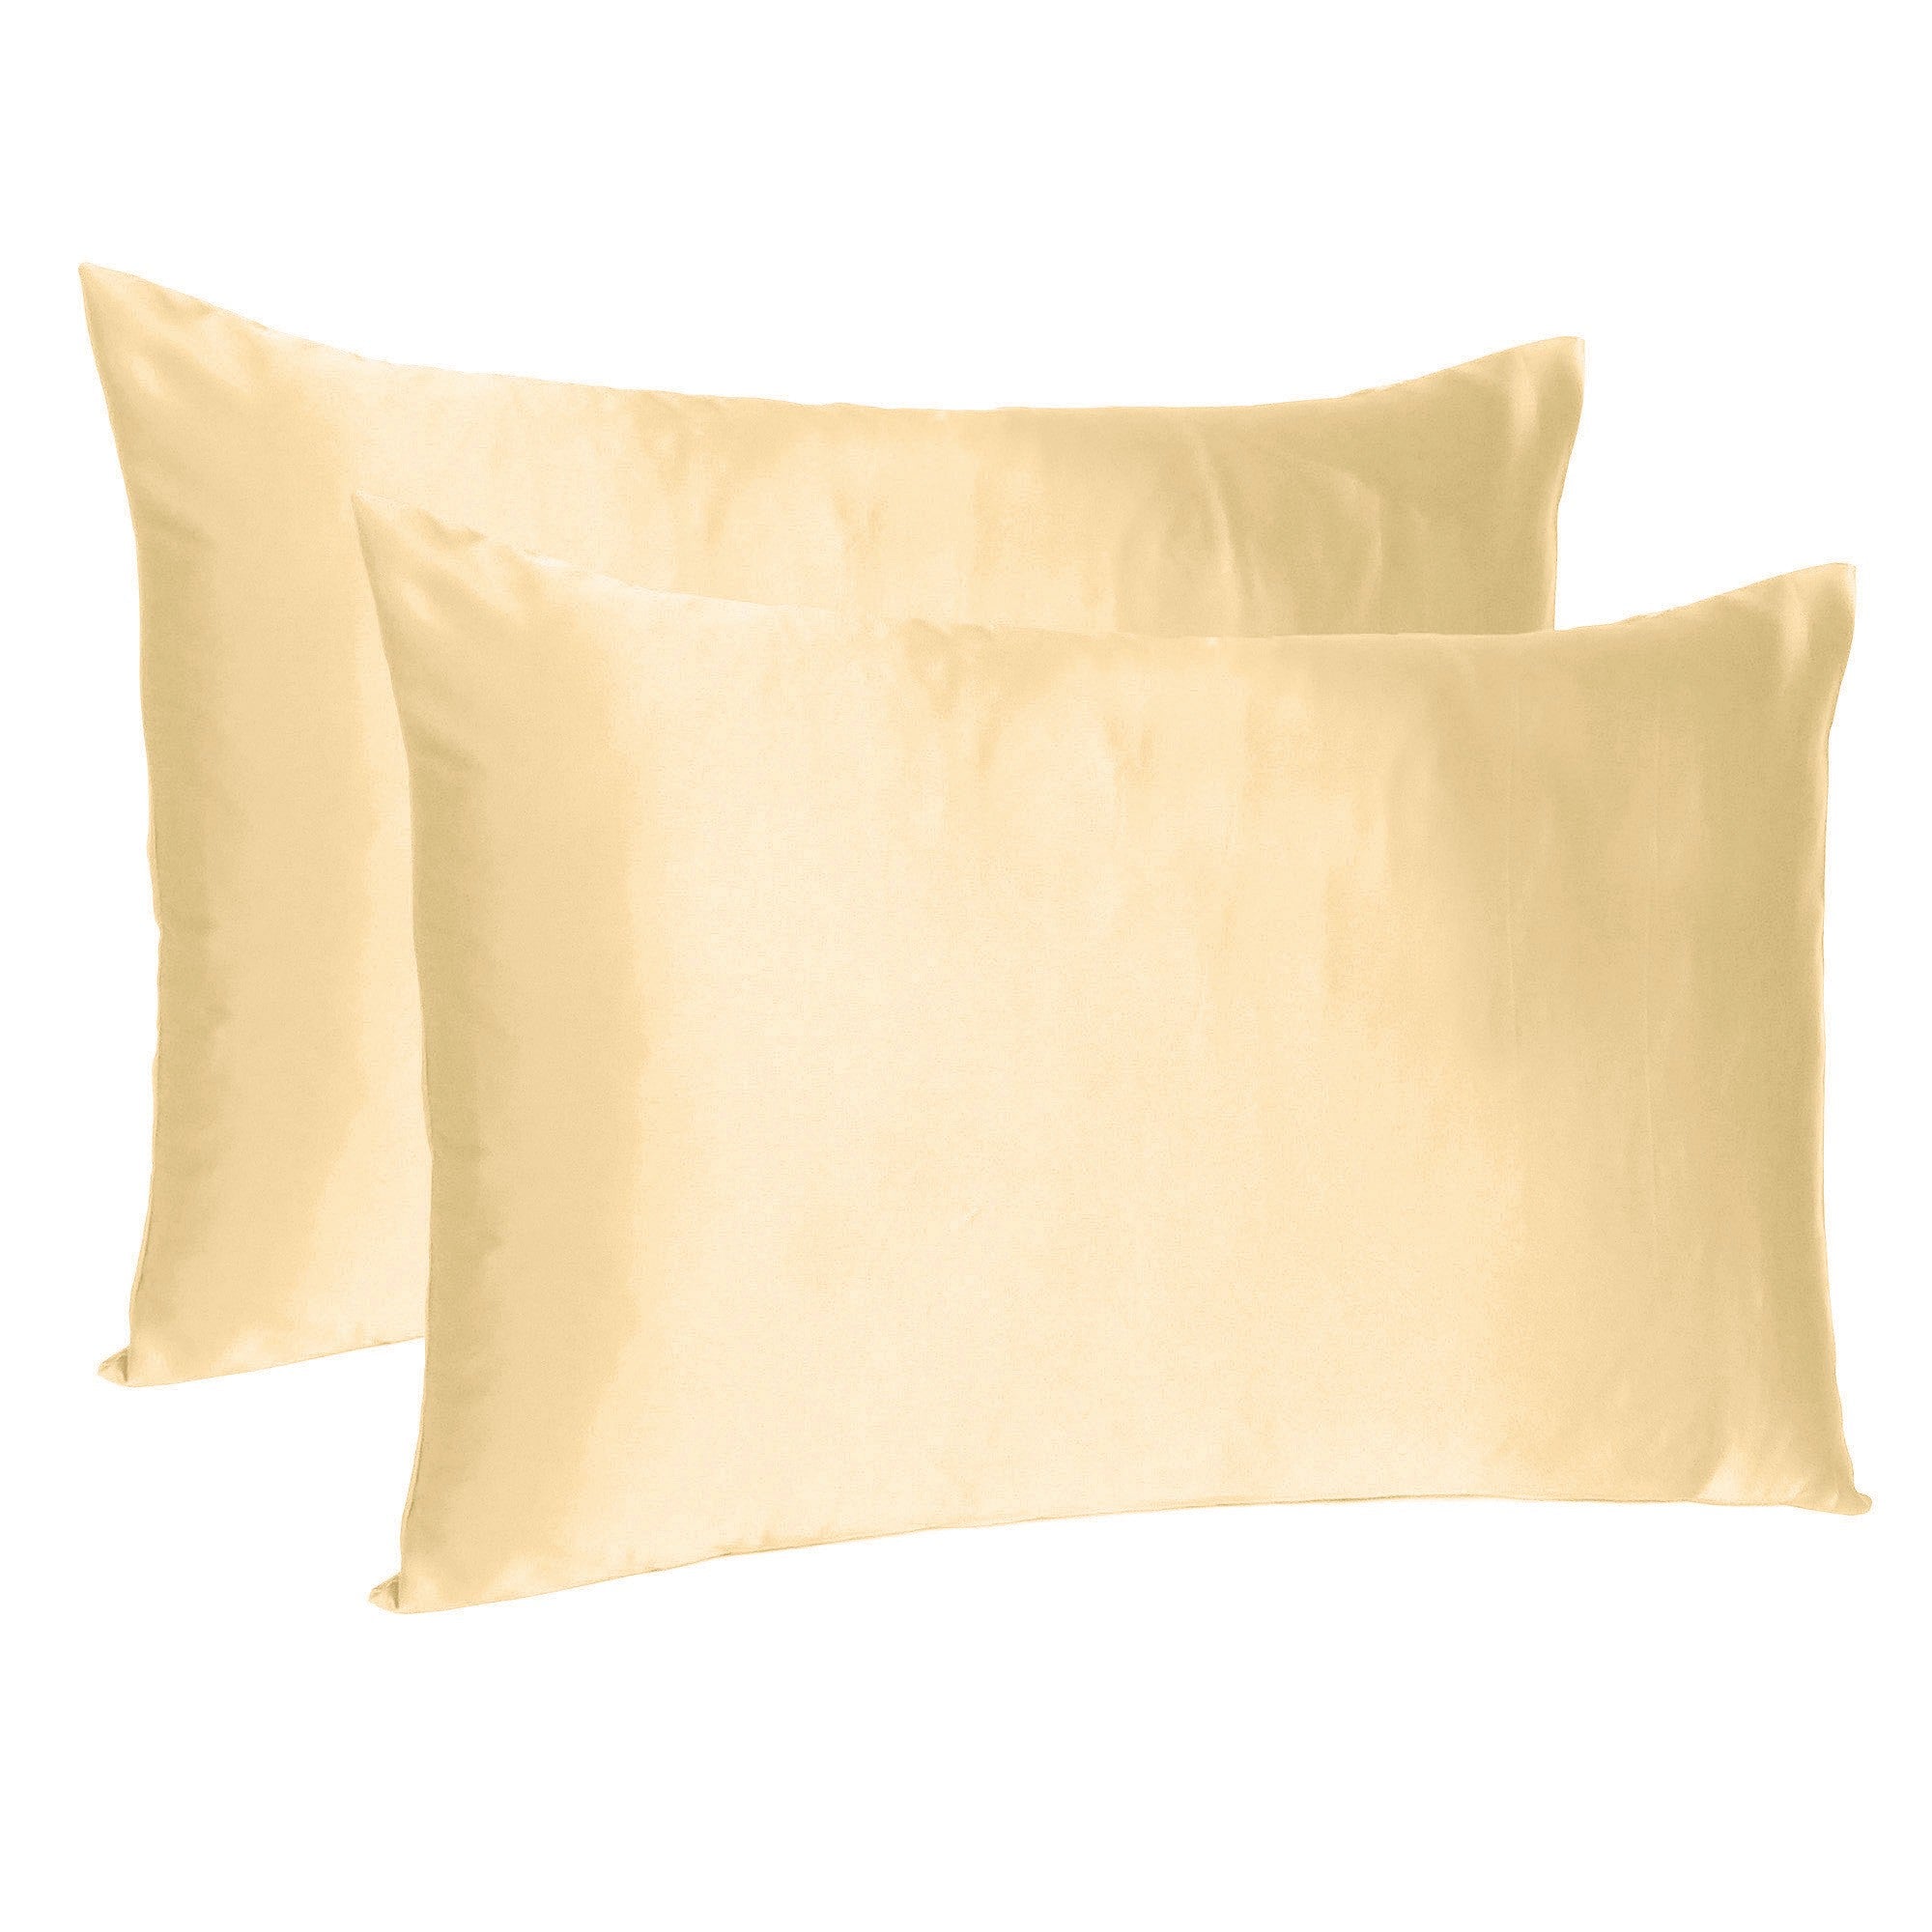 Pale-Peach-Dreamy-Set-Of-2-Silky-Satin-Standard-Pillowcases-Bed-Sheets